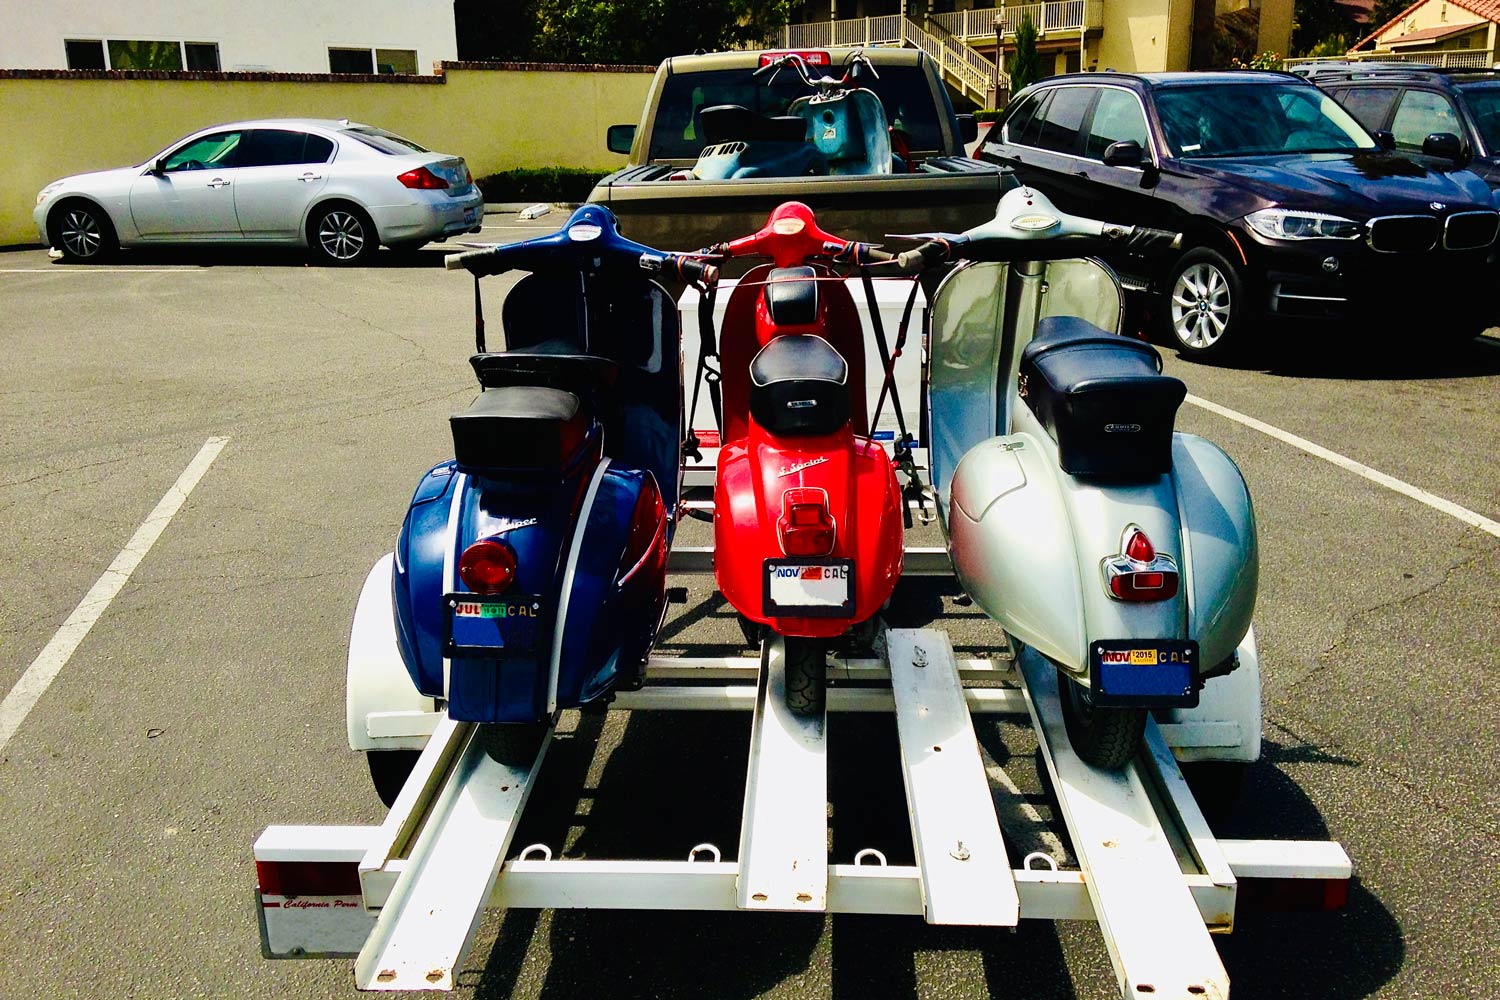 A blue, a red, and a silver vintage Vespa sit on a white motorcycle trailer with a vintage blue Henkel scooter sitting in the bed of a green Ram truck.